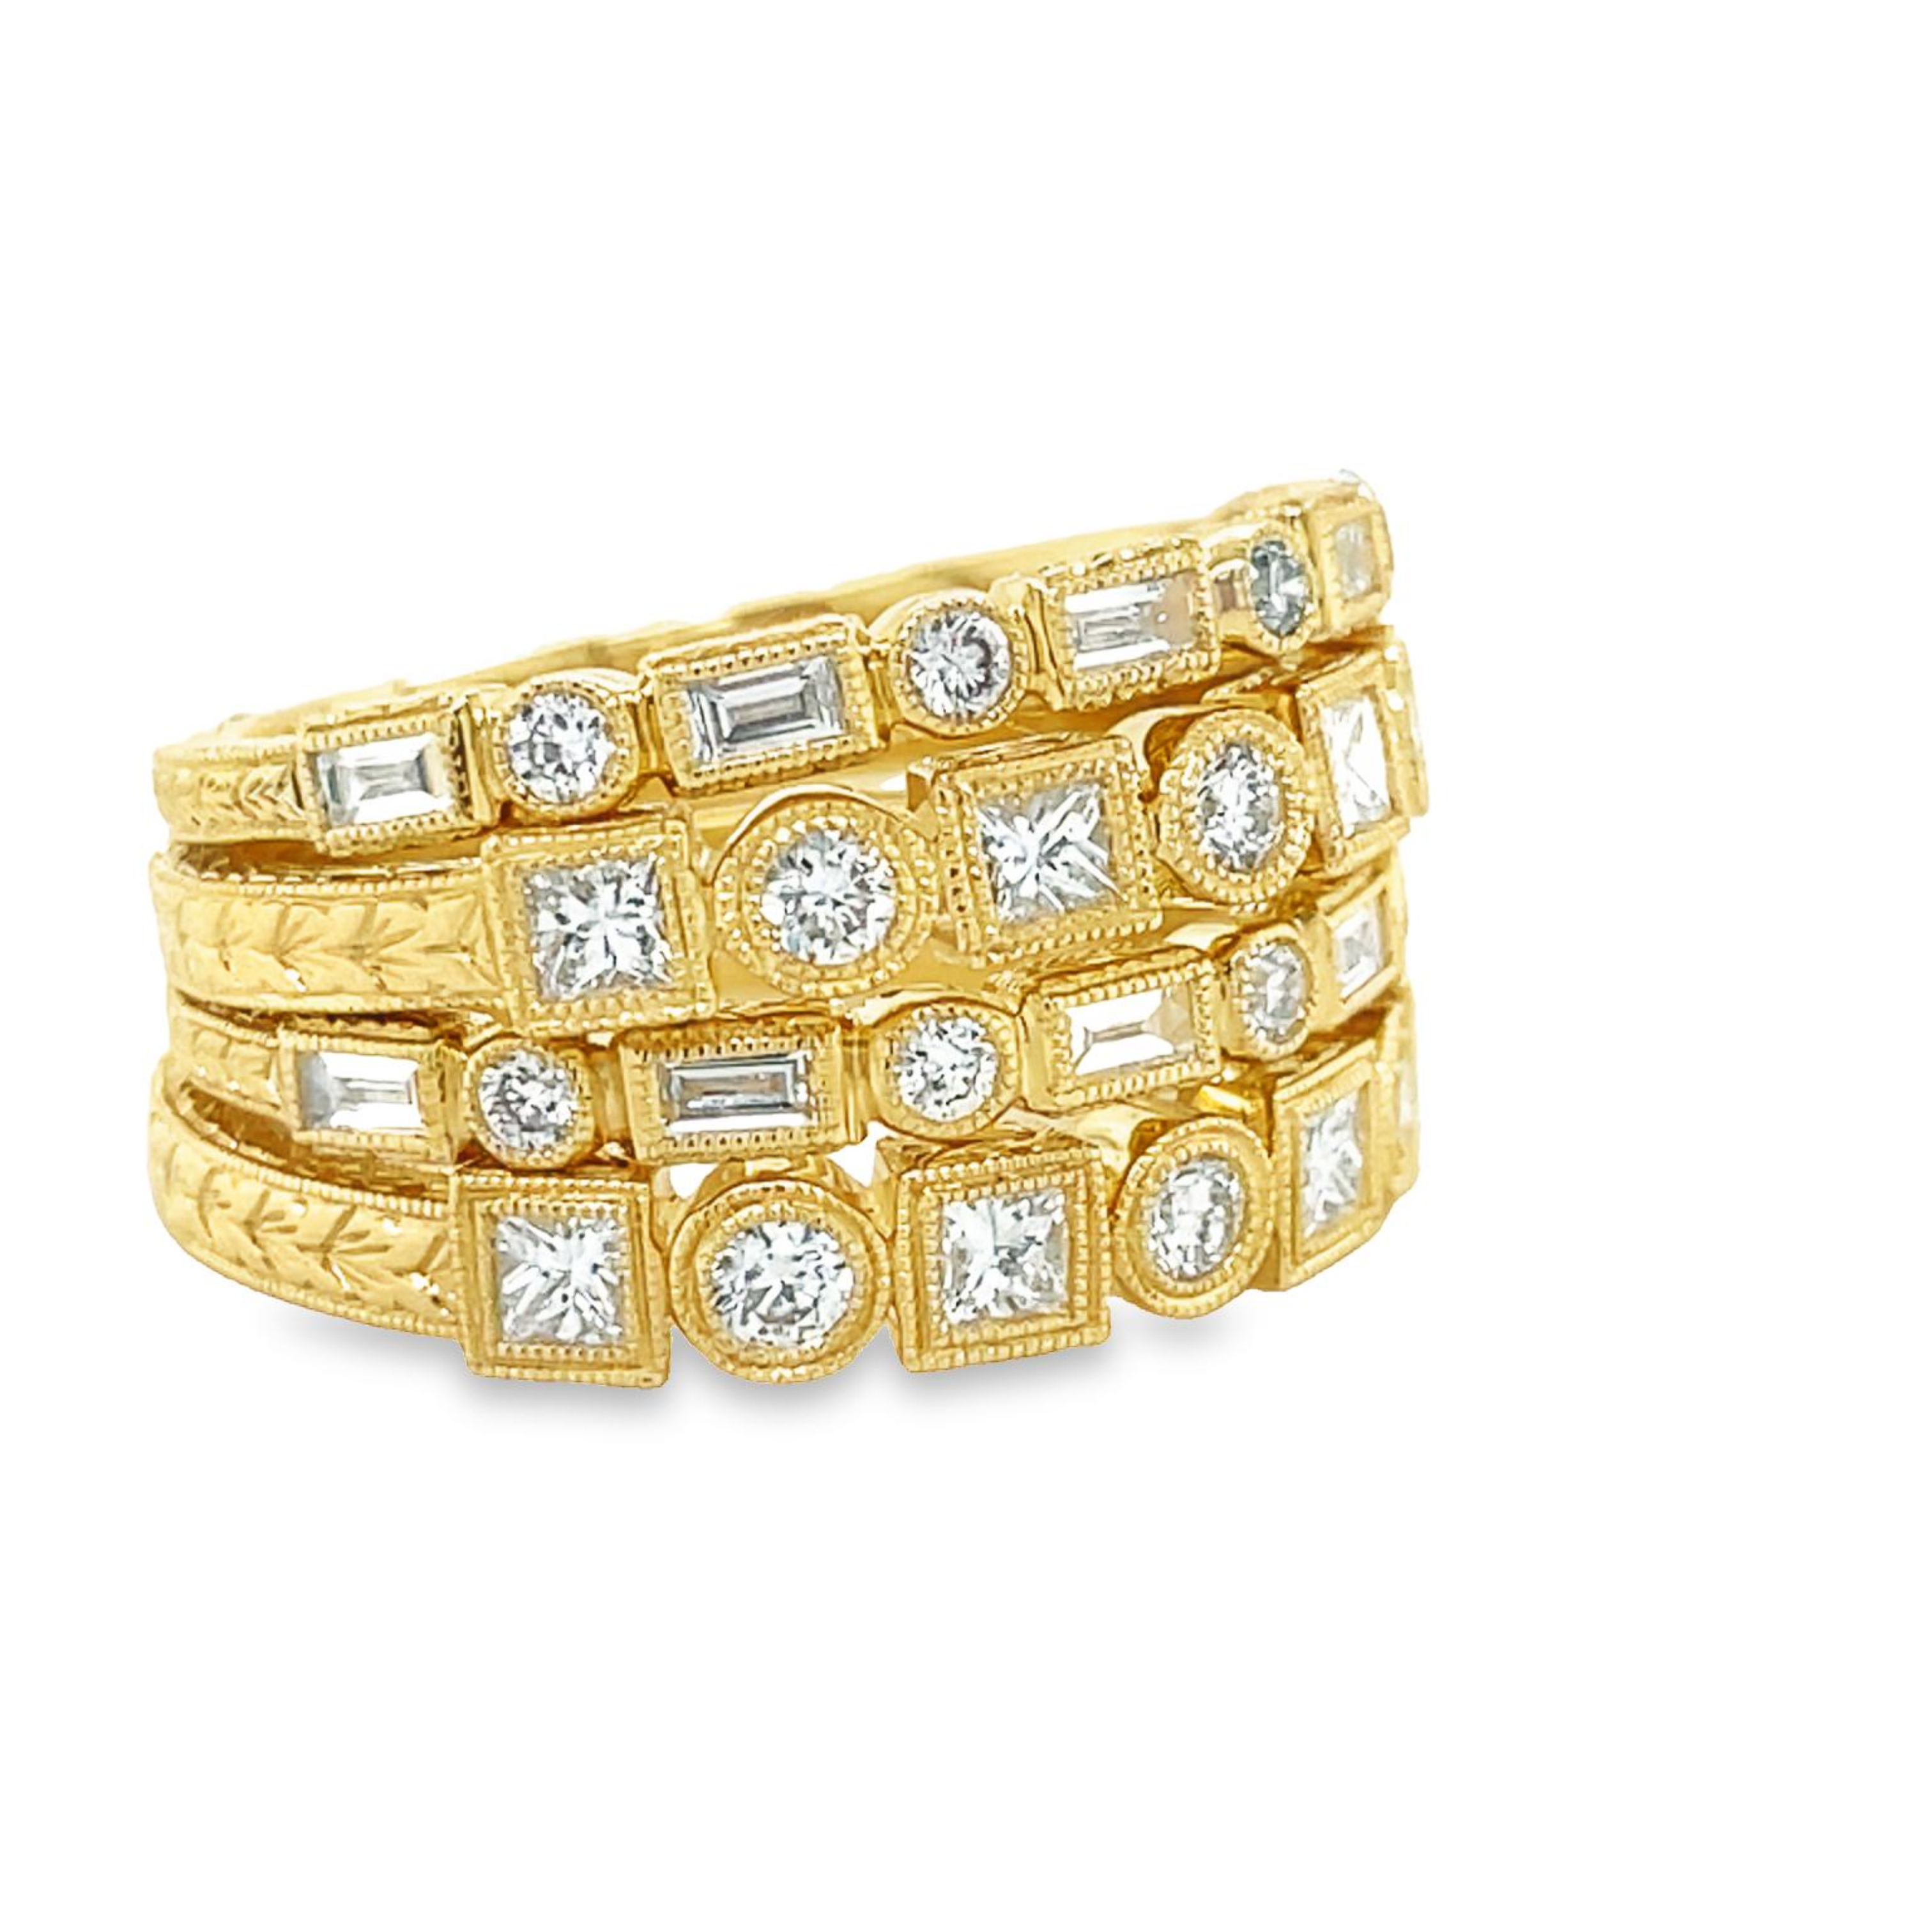 A timeless piece showcasing a classic art deco style crafted with 0.39 cts of round diamonds, set in 14k yellow gold. Available in size 6.5 and easily adjustable to any size for a custom fit. Enjoy its versatility as you stack and style it to complete your look.